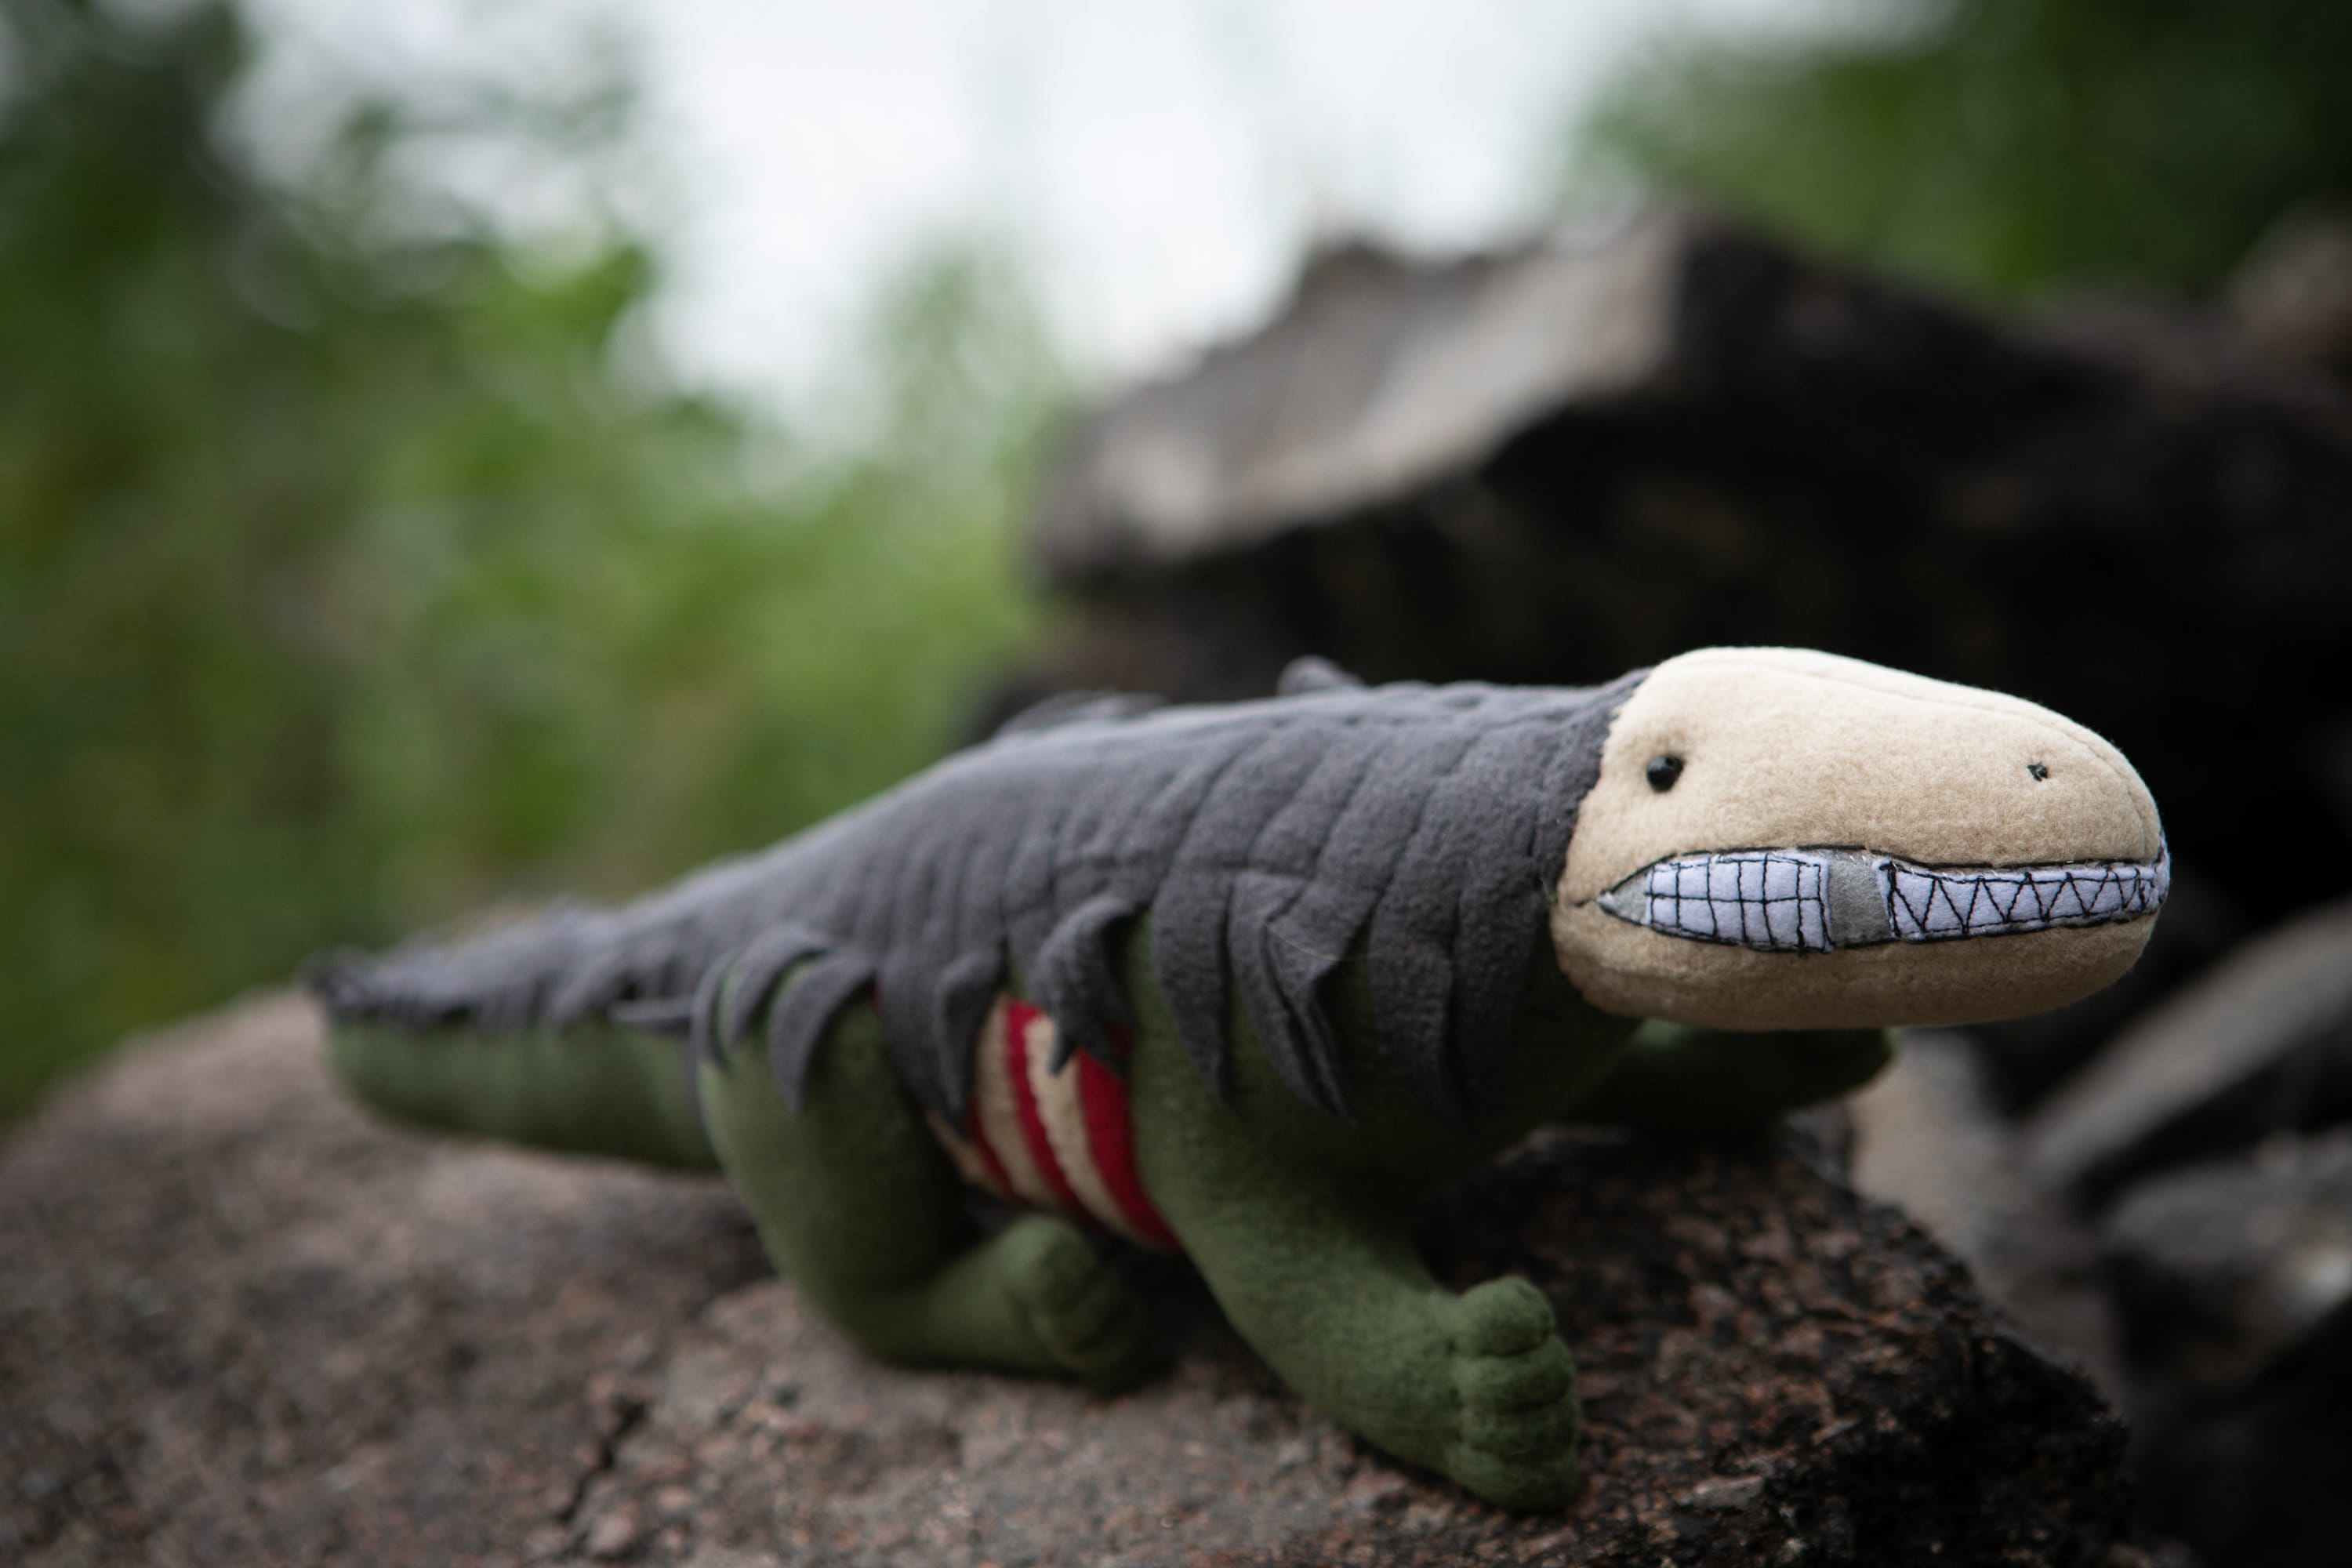  SCP 682 Reptile plush , Hard to destroy reptile handmade soft  decoration 15.7 x 5 in : Handmade Products